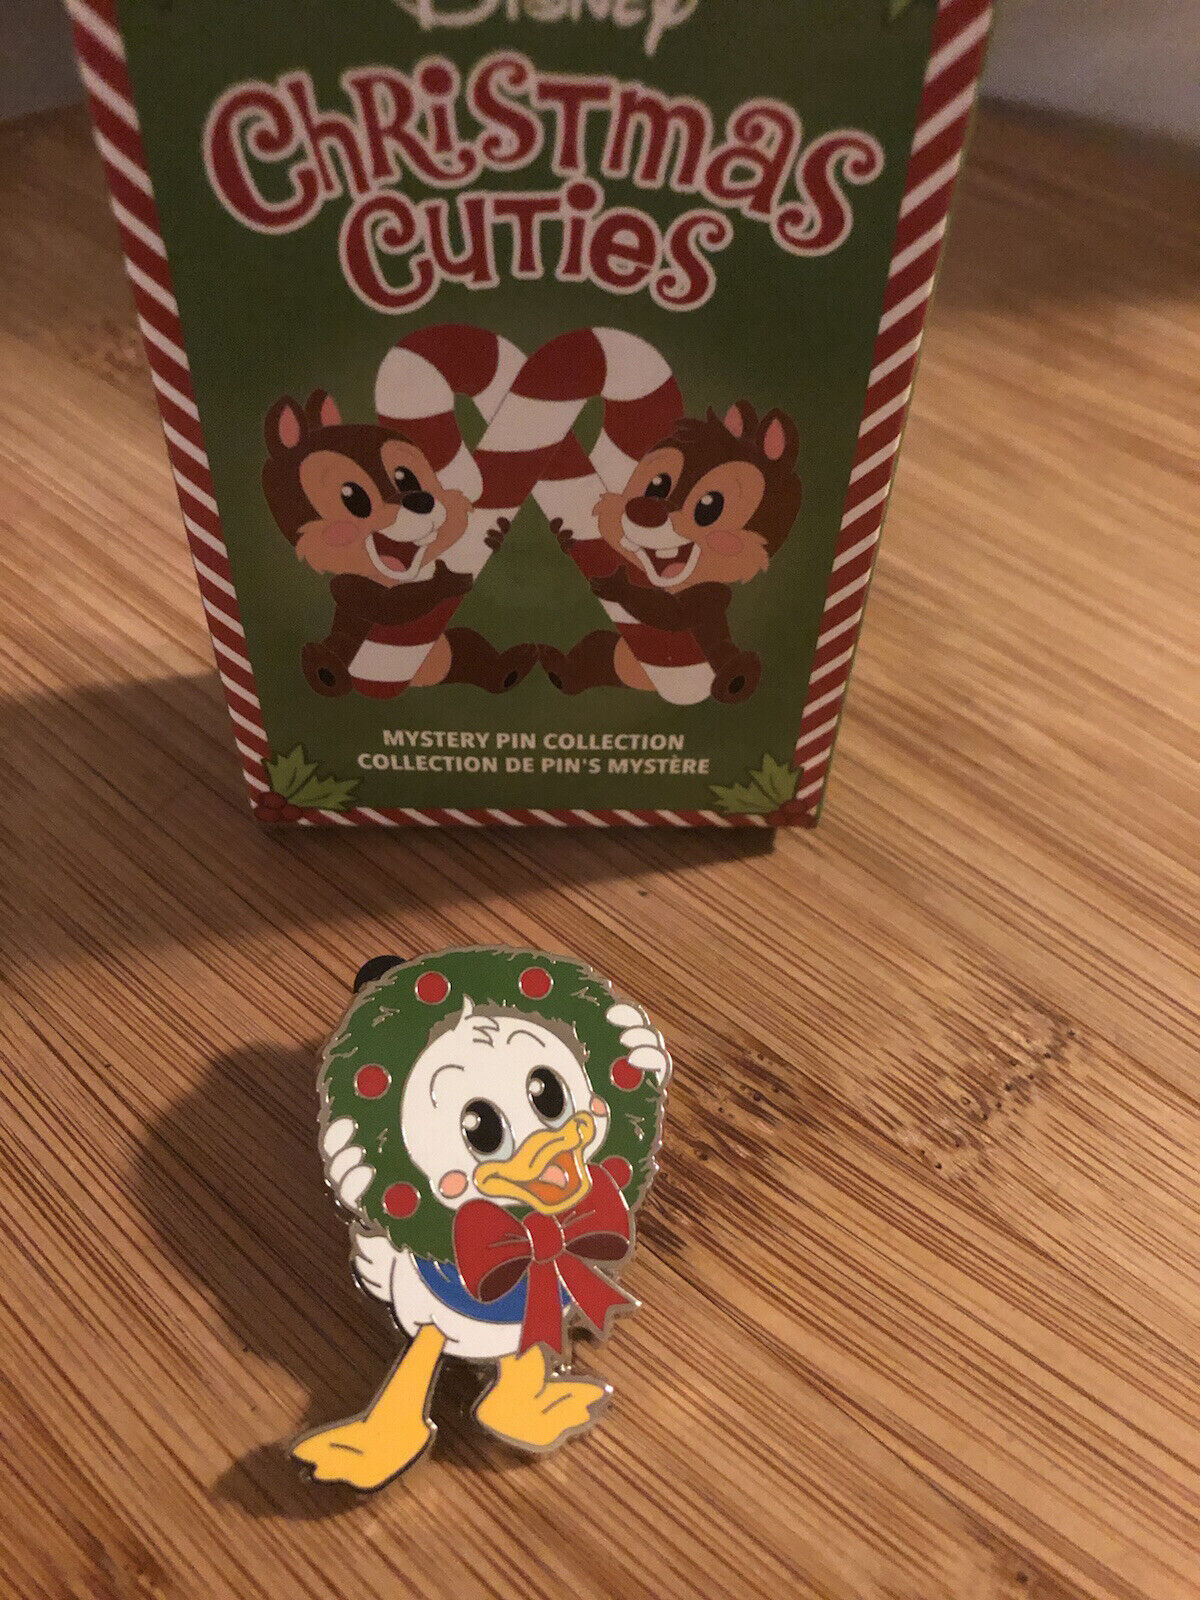 Disney 2021 Christmas Cuties Mystery Pin Collection LR - Donald Duck New